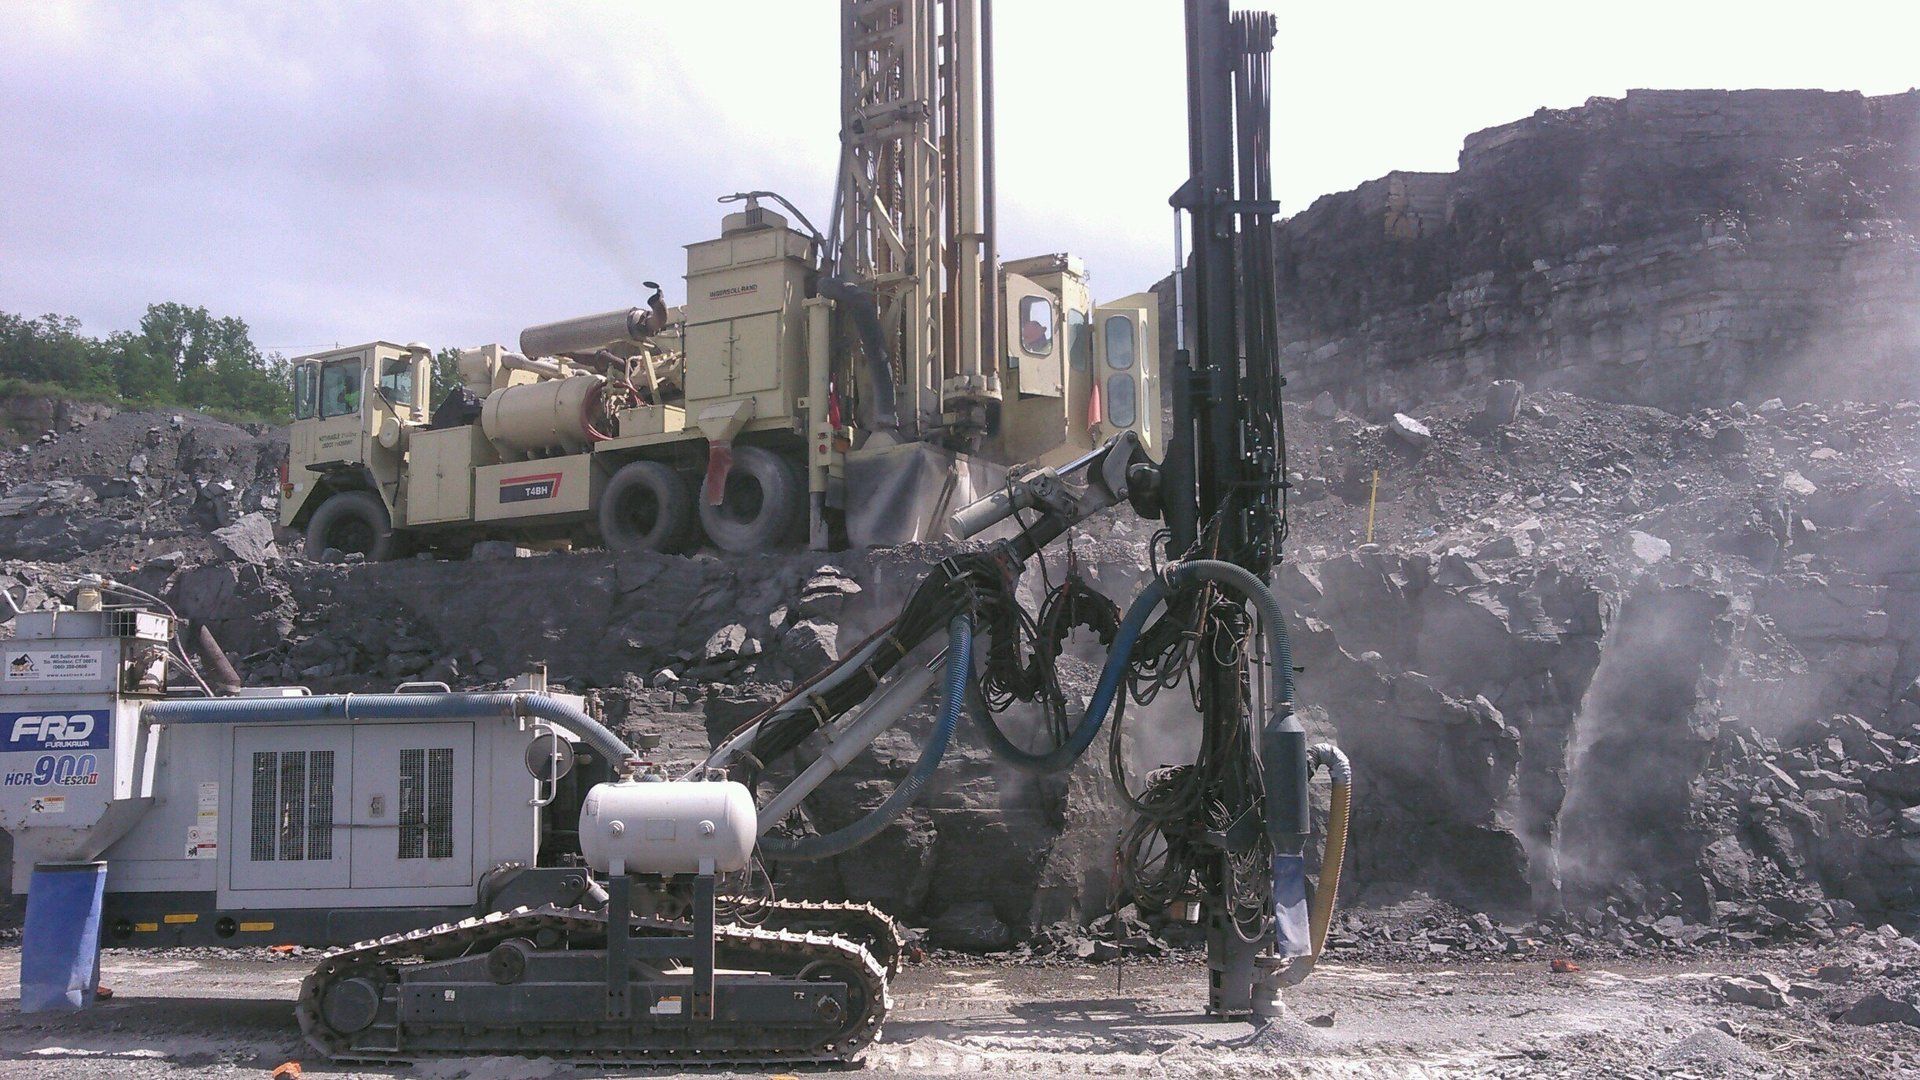 a large drill is drilling a hole in the ground